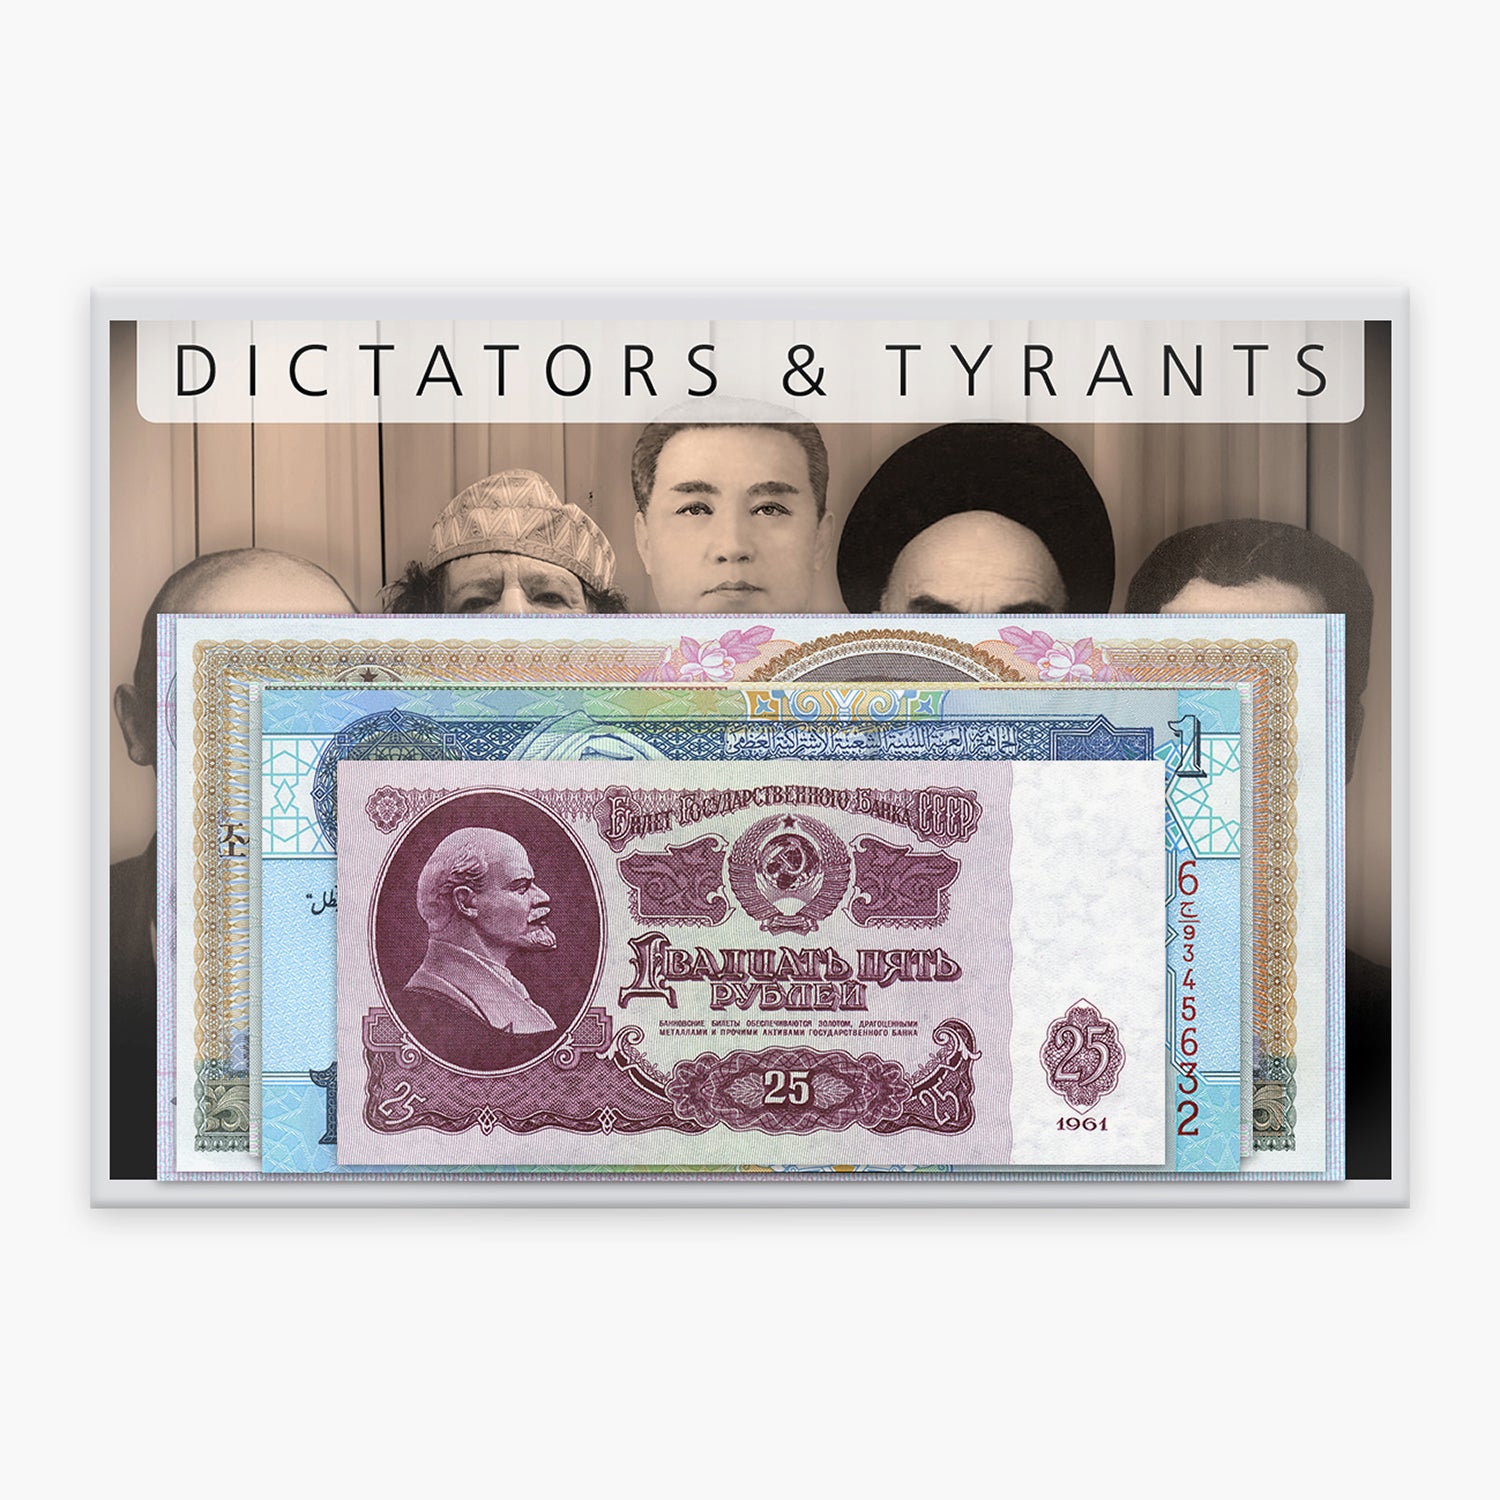 Banknote Collection "Dictators & Tyrants"